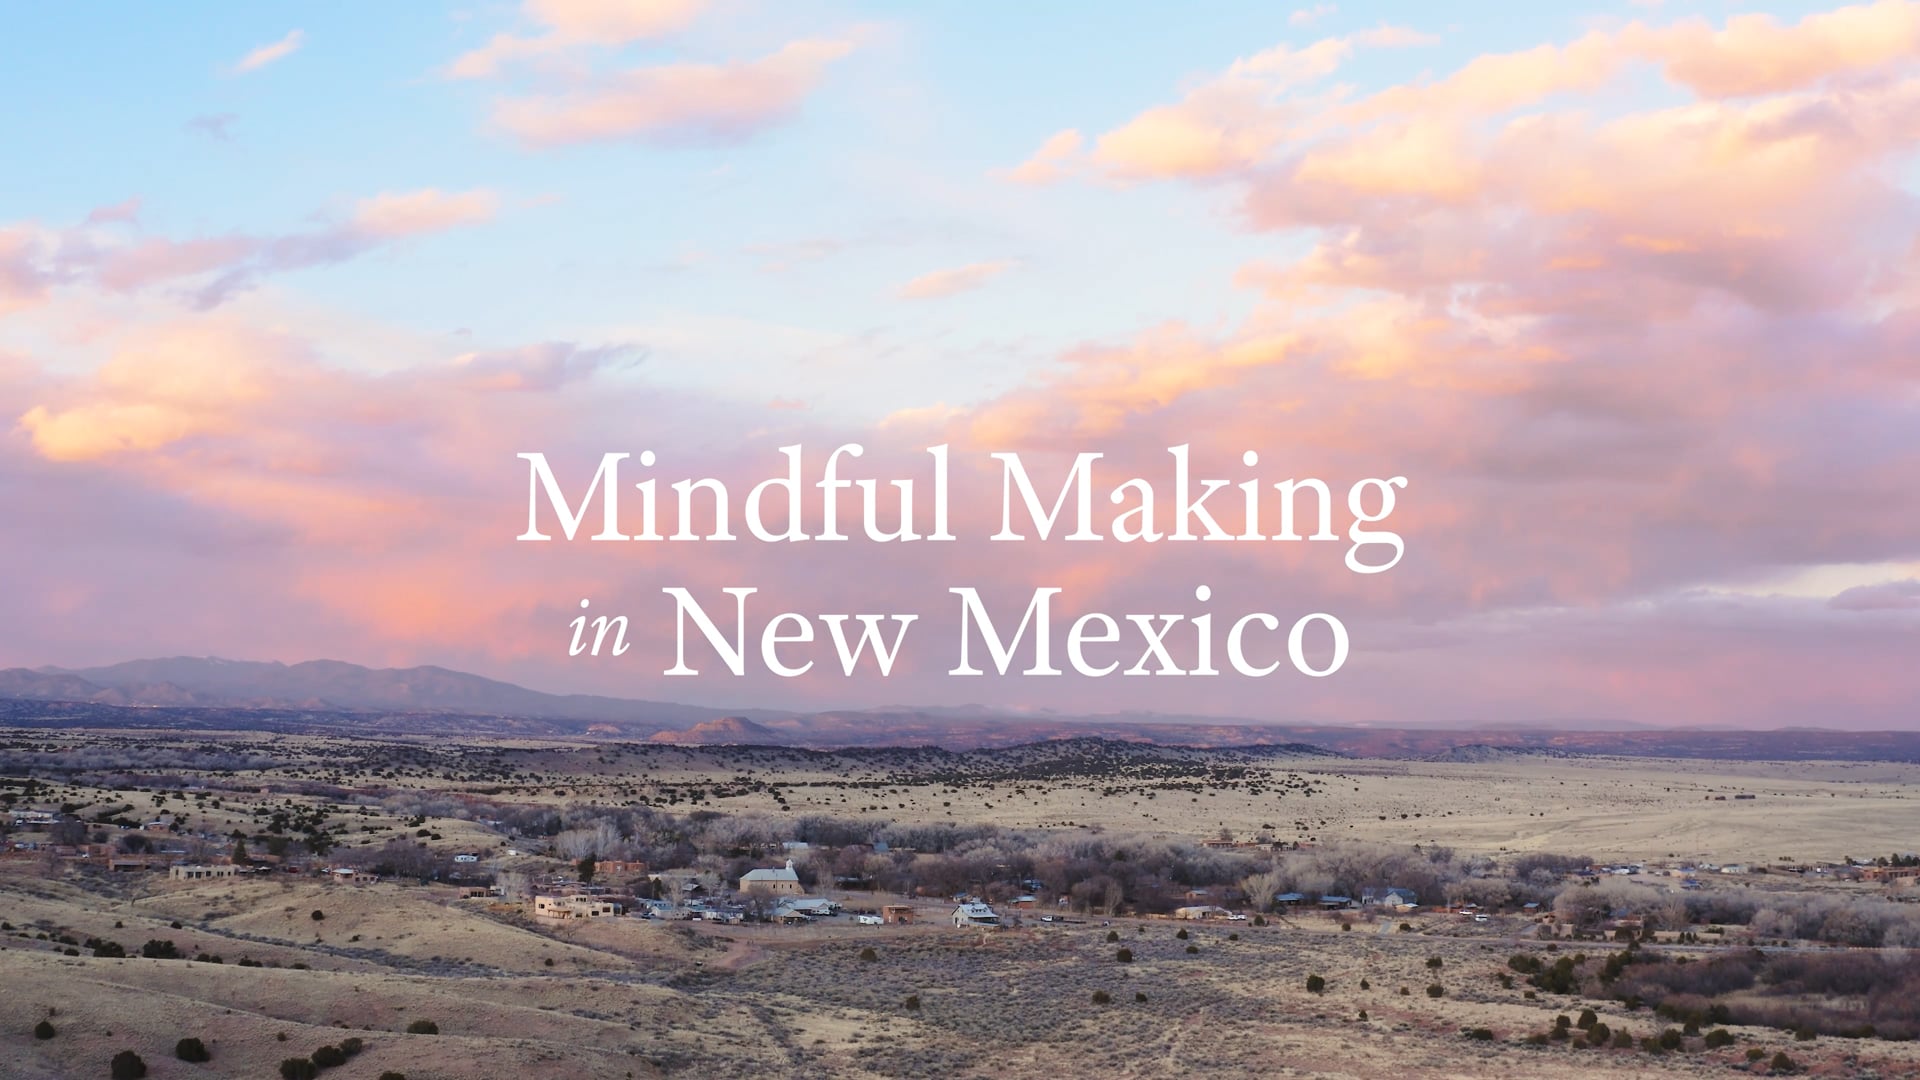 Quiltfolk - Mindful Making in New Mexico